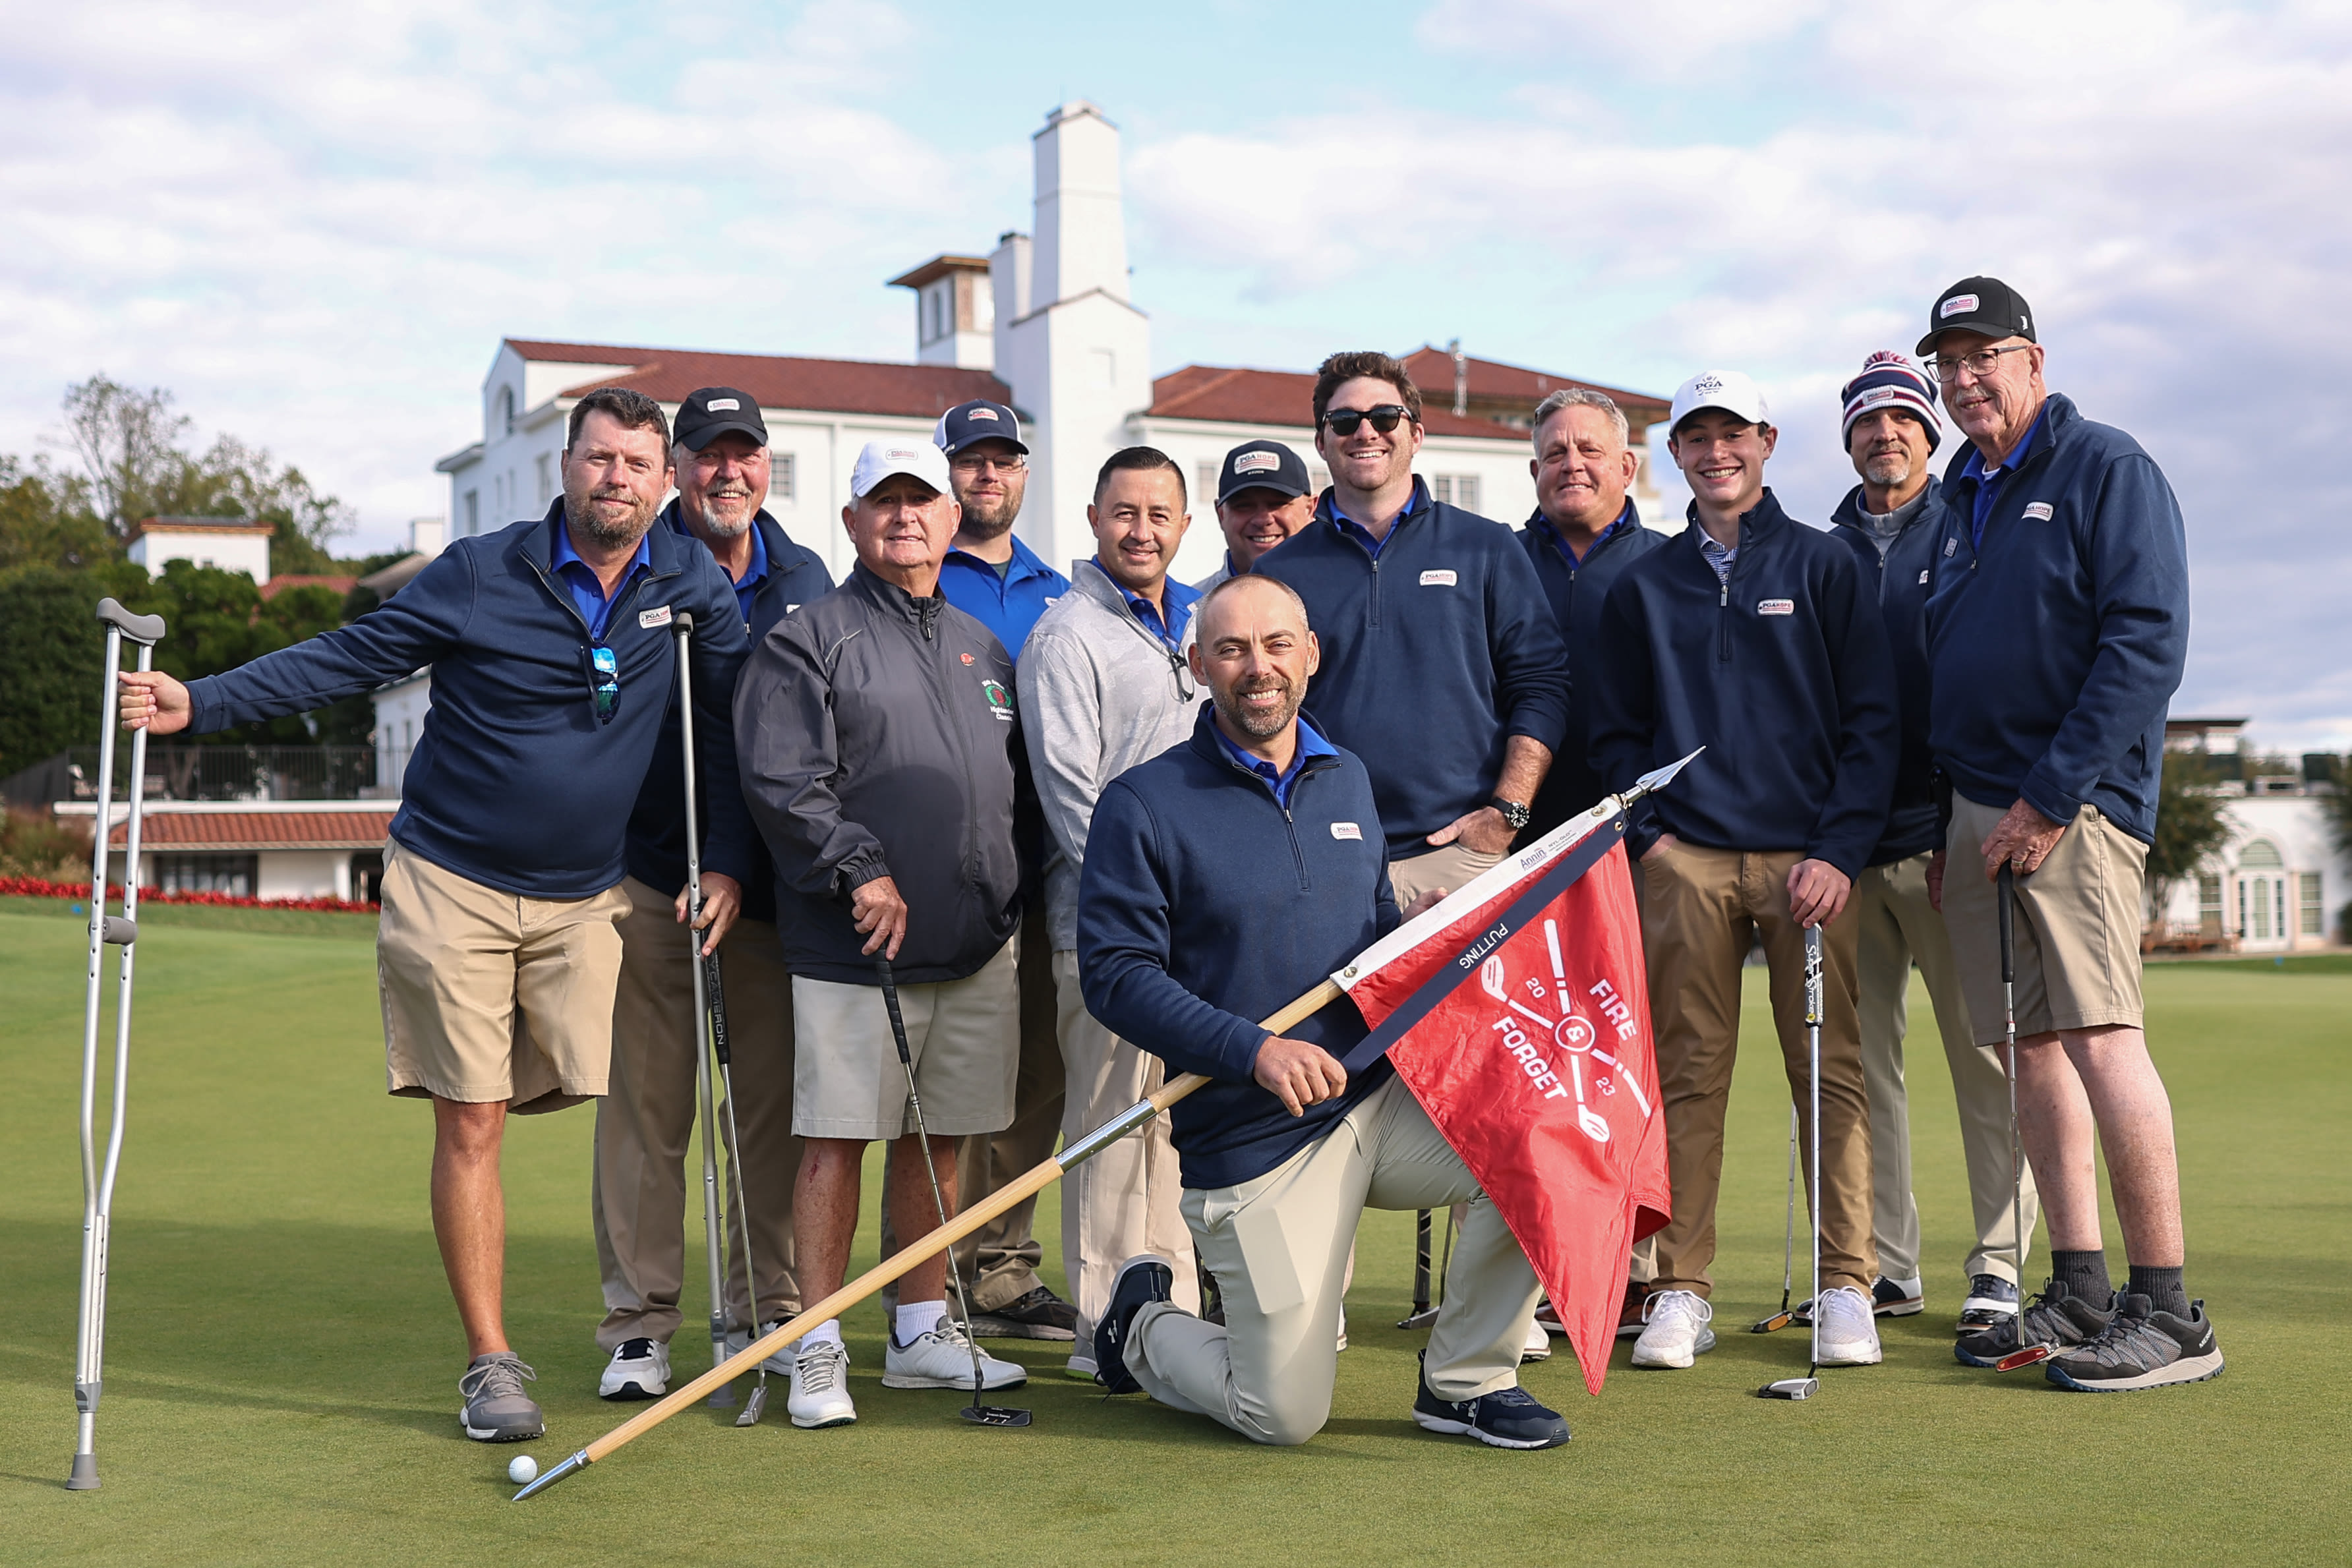 Slater (back row in blue) at Congressional during PGA HOPE National Golf & Wellness week.